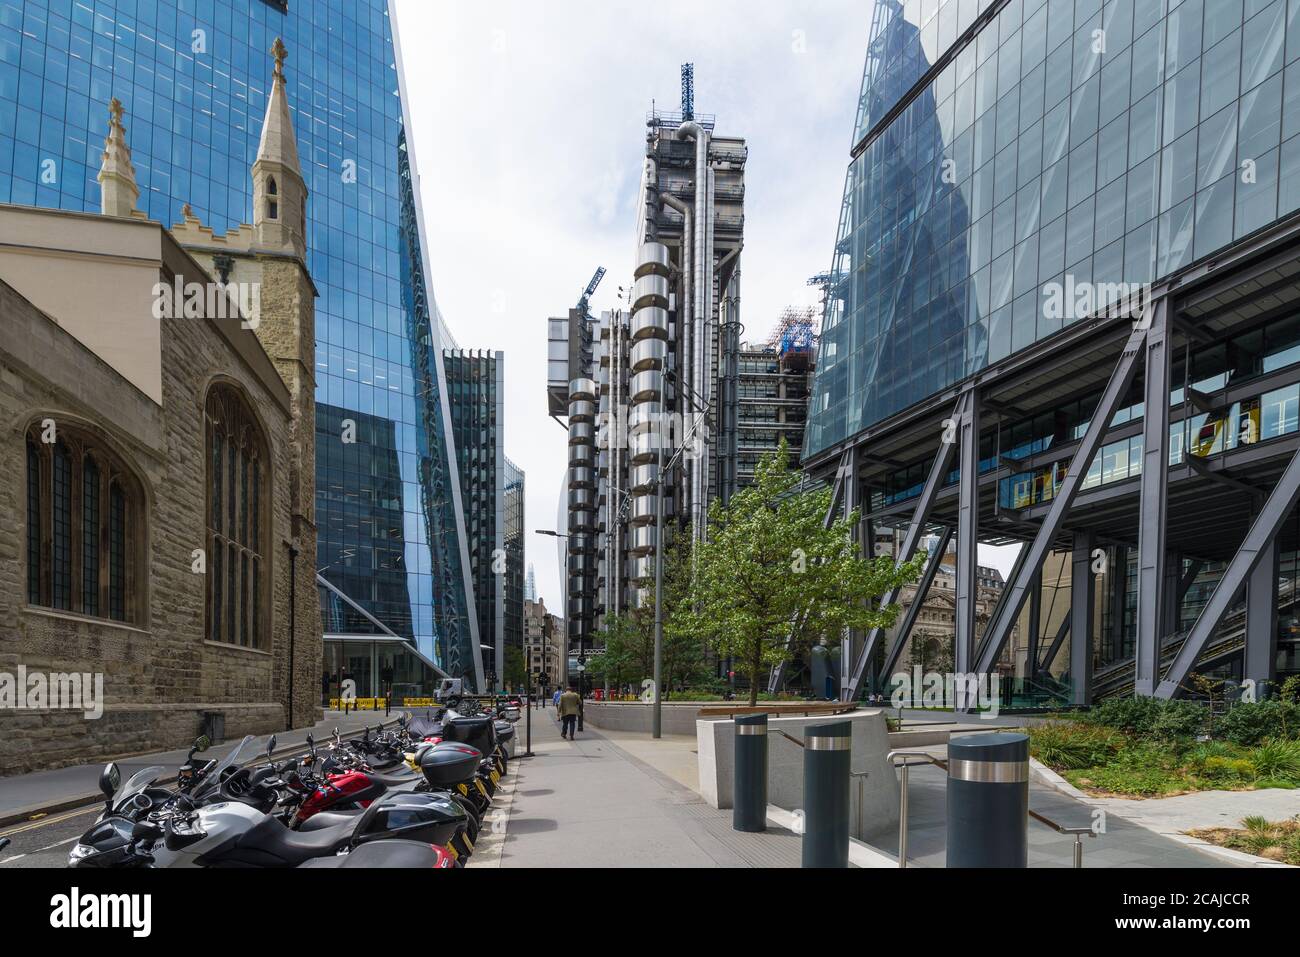 The Lloyd's of London building in Lime Street, as seen from St. Mary Axe, City of London, England, UK Stock Photo